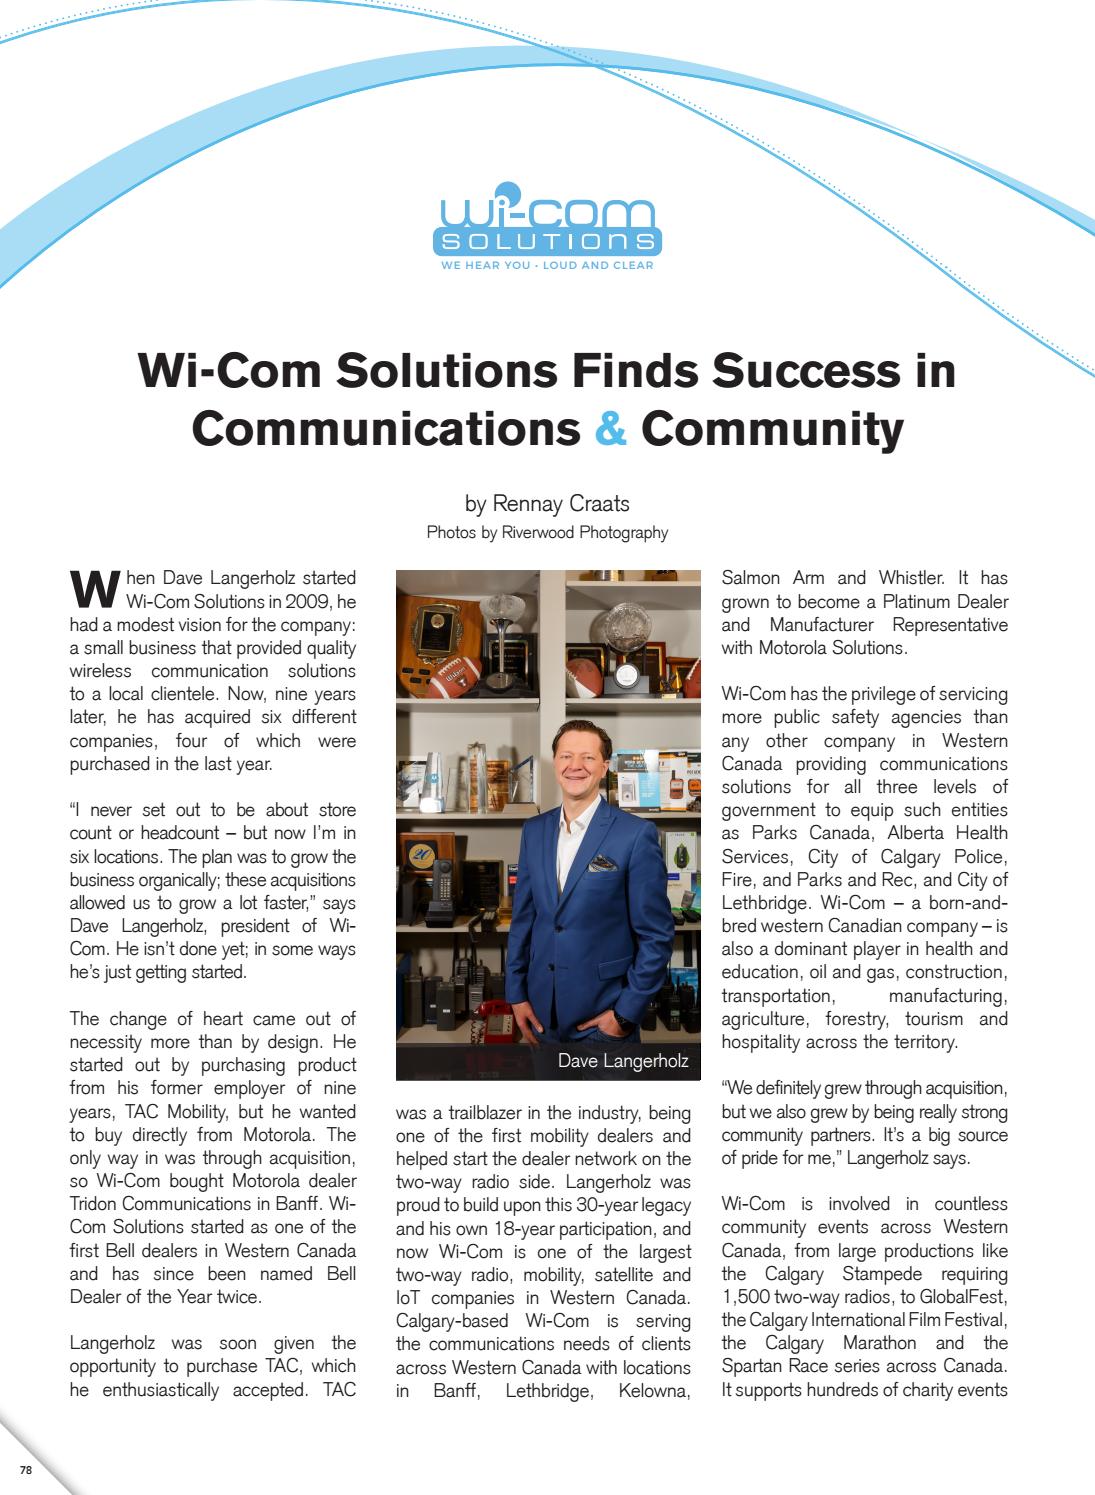 Business in Calgary Magazine - Business Profile for Wi-Com Solutions